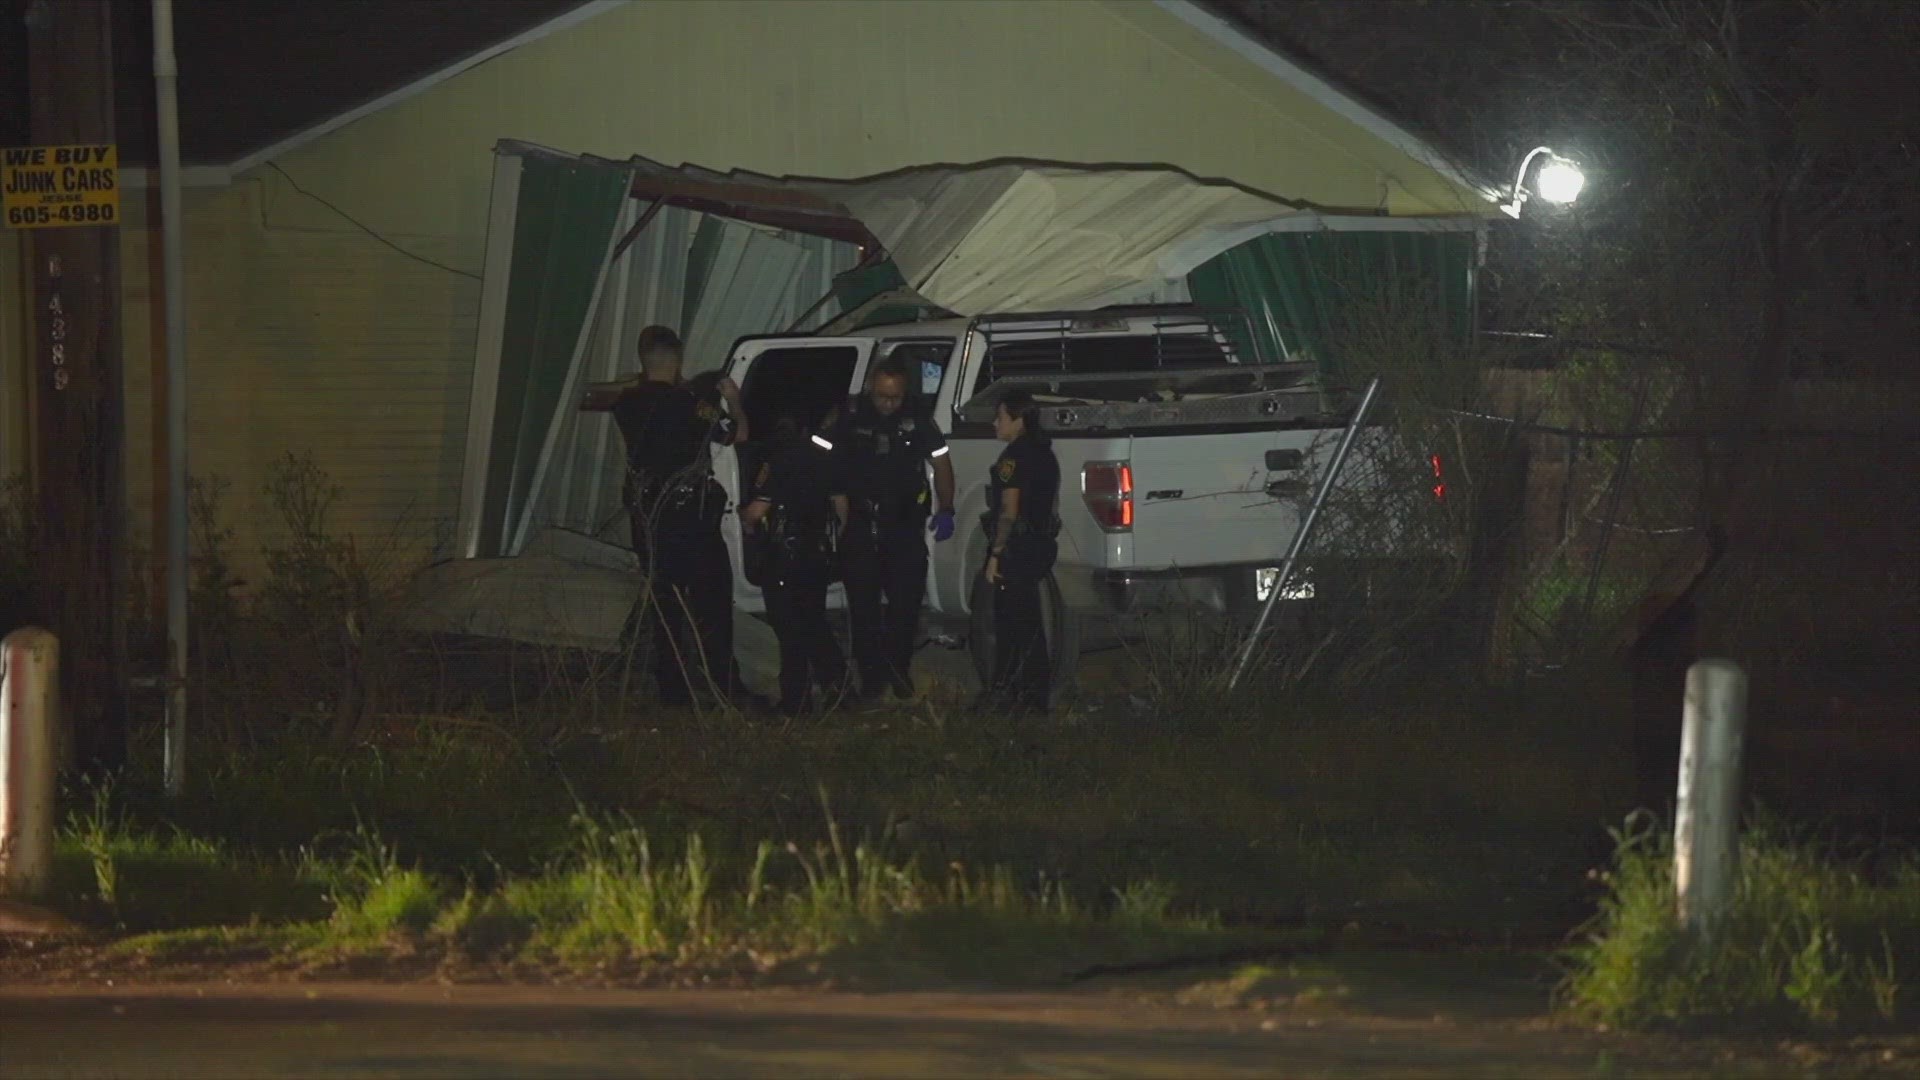 Officers said the driver was driving at a high rate of speed when he lost control and drove through a shallow dry creek, then through a shed and hit a home.